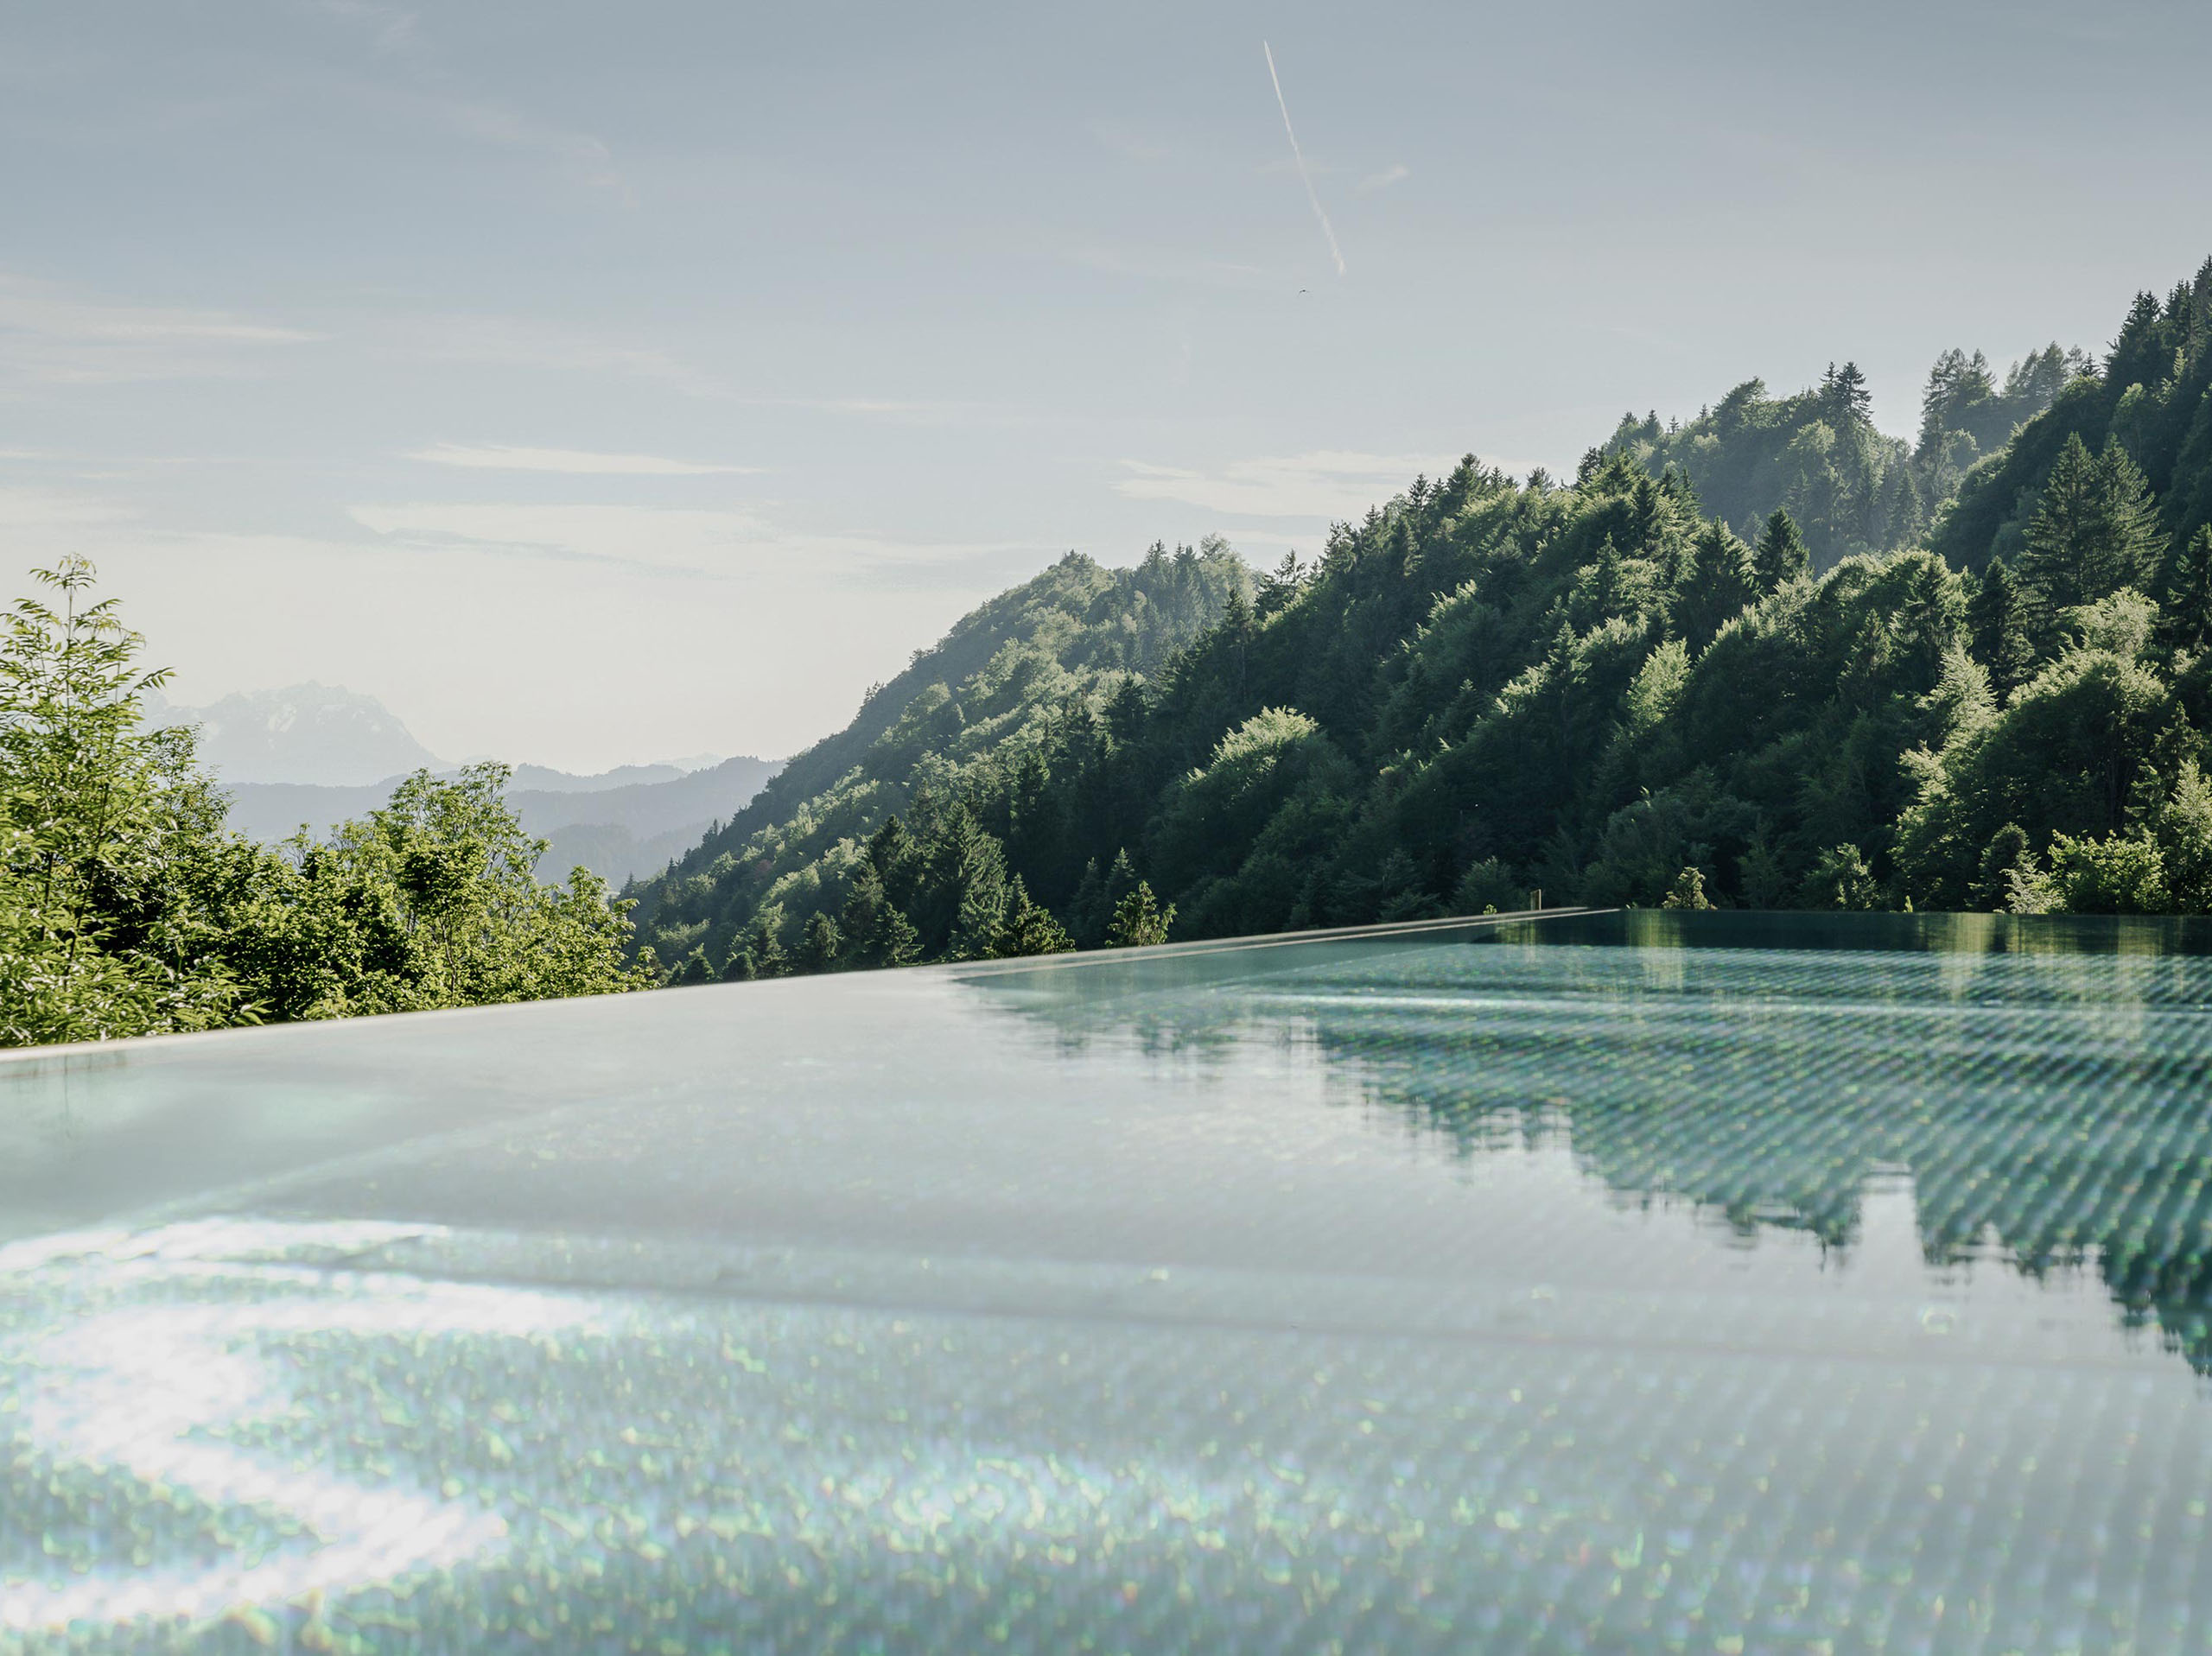 Alpine Rush - An architectural journey through the Alps | More information to come